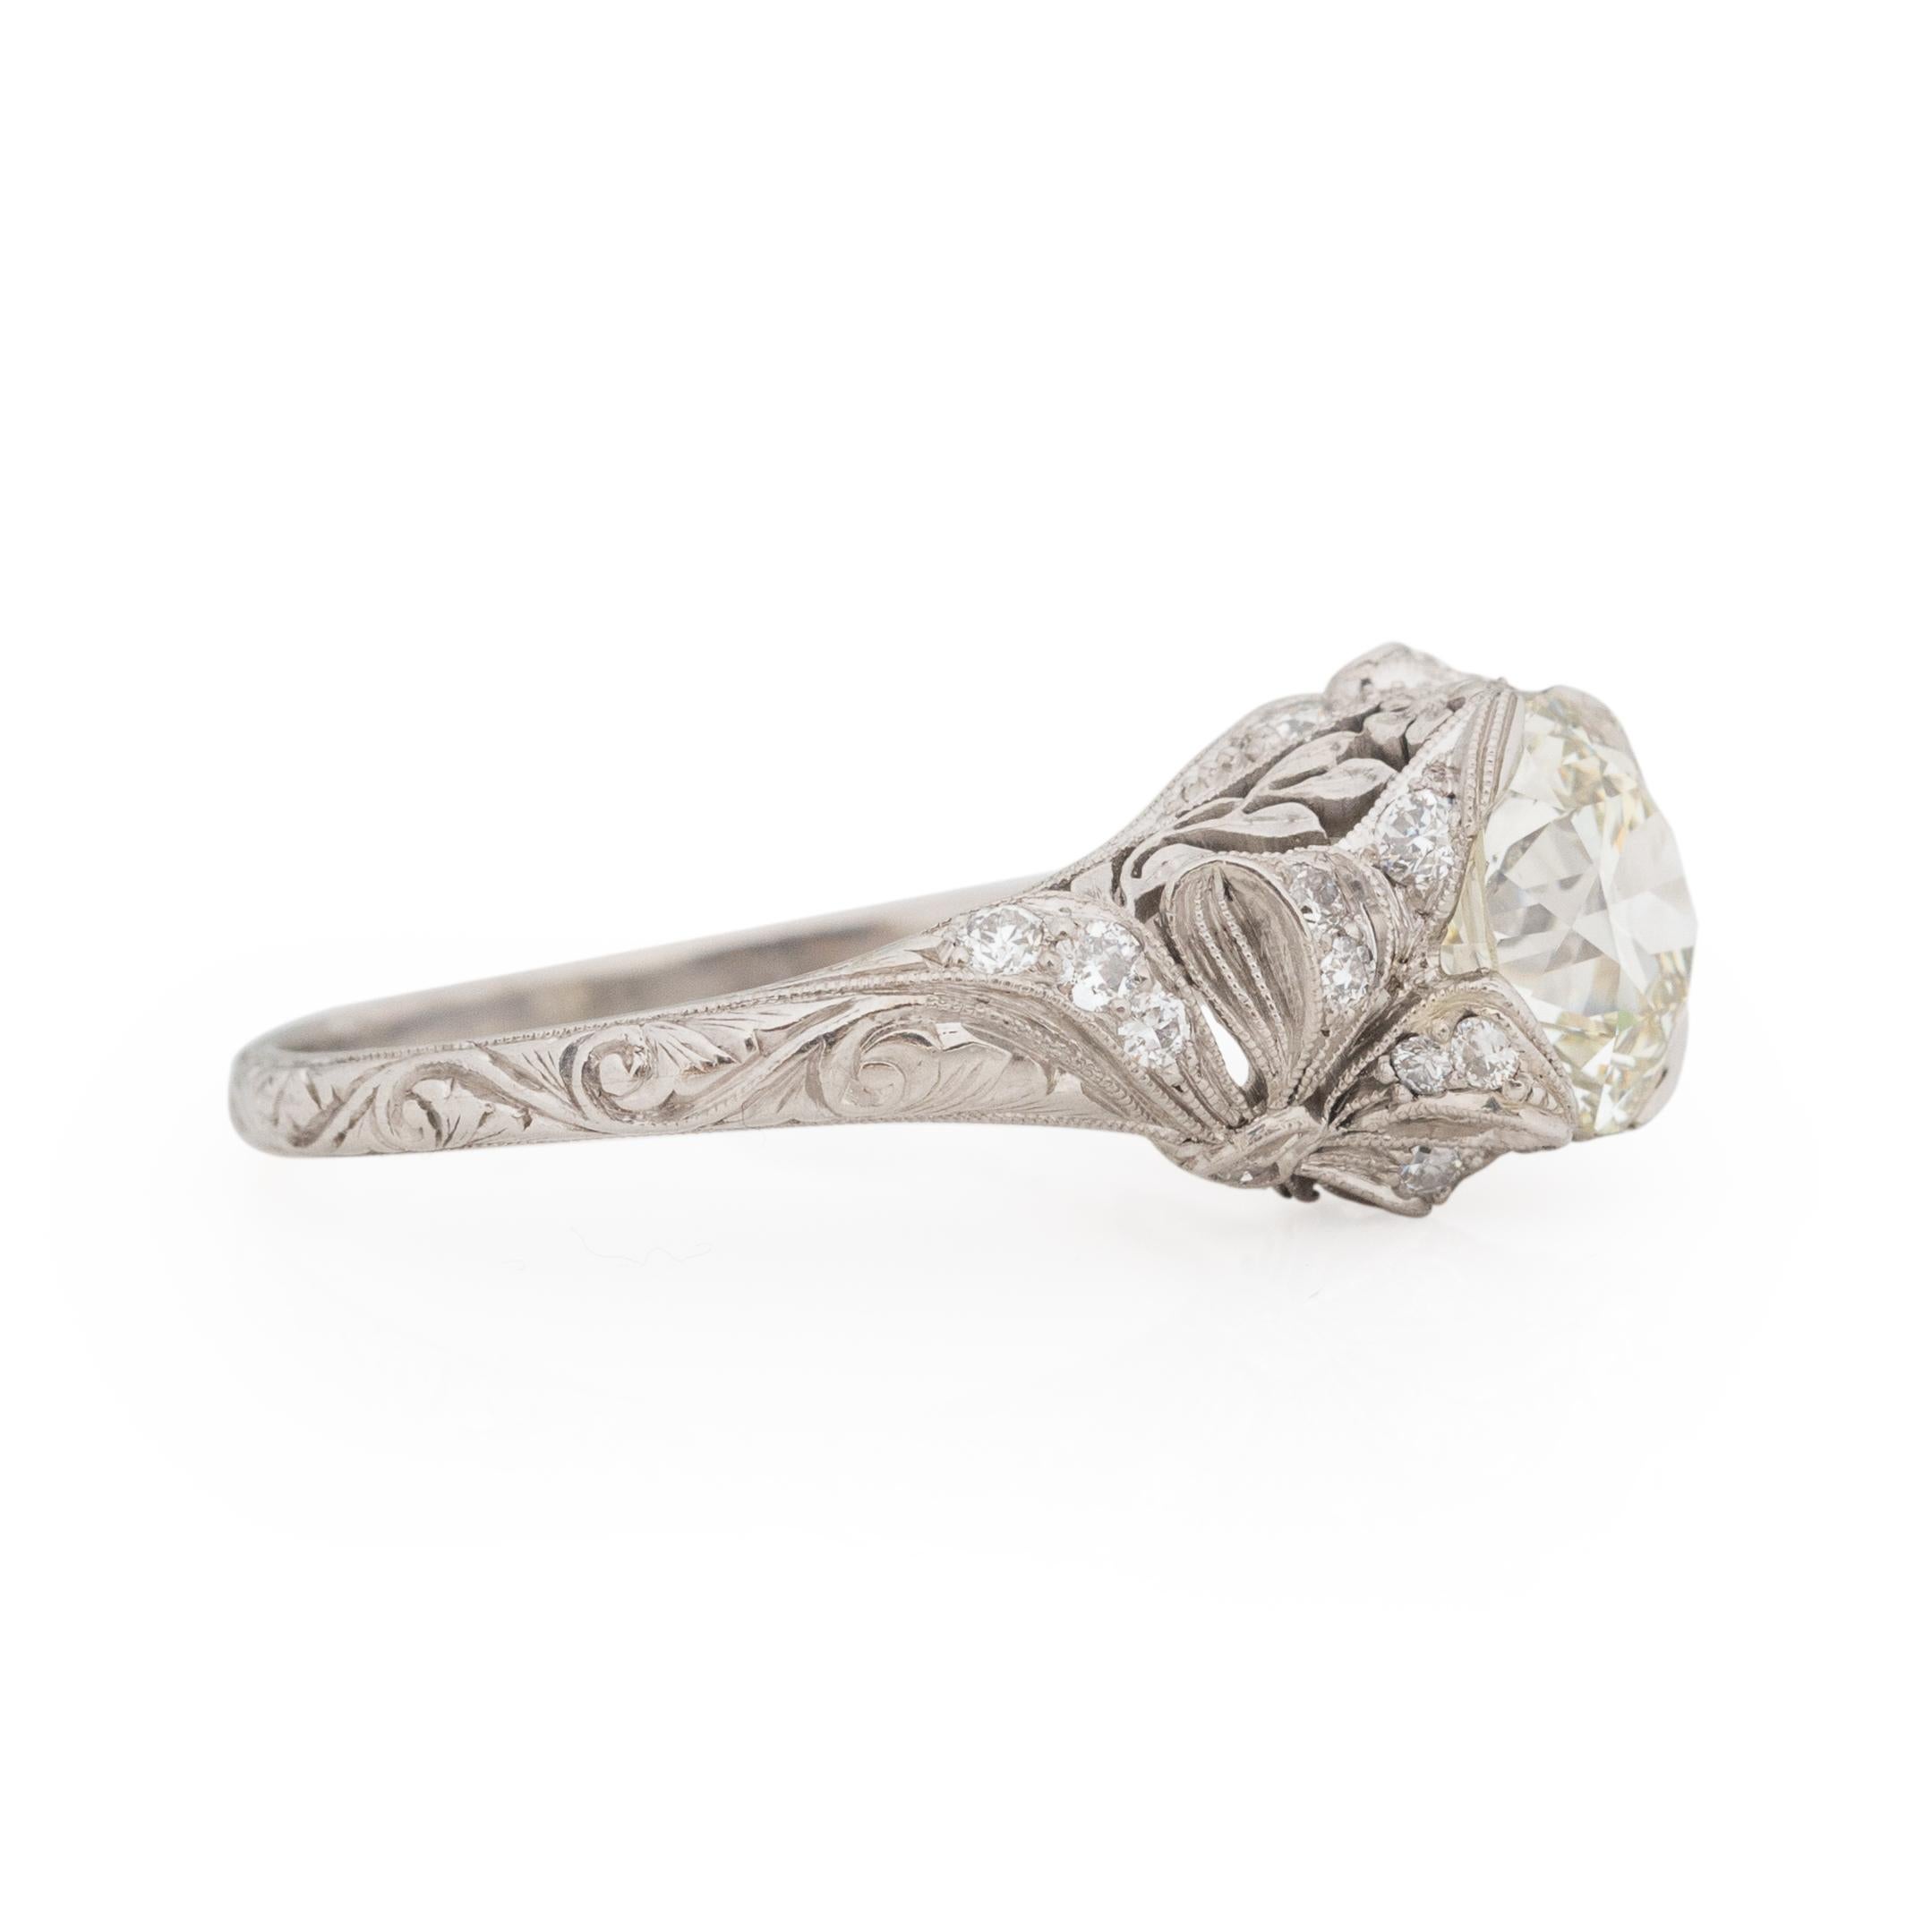 This Edwardian beauty has crazy intricate and impressive hand carved details, sure to take your breath away. Crafted in platinum this ring had survived the test of time. The flowing swirling design wraps all the way around the shanks, just as you